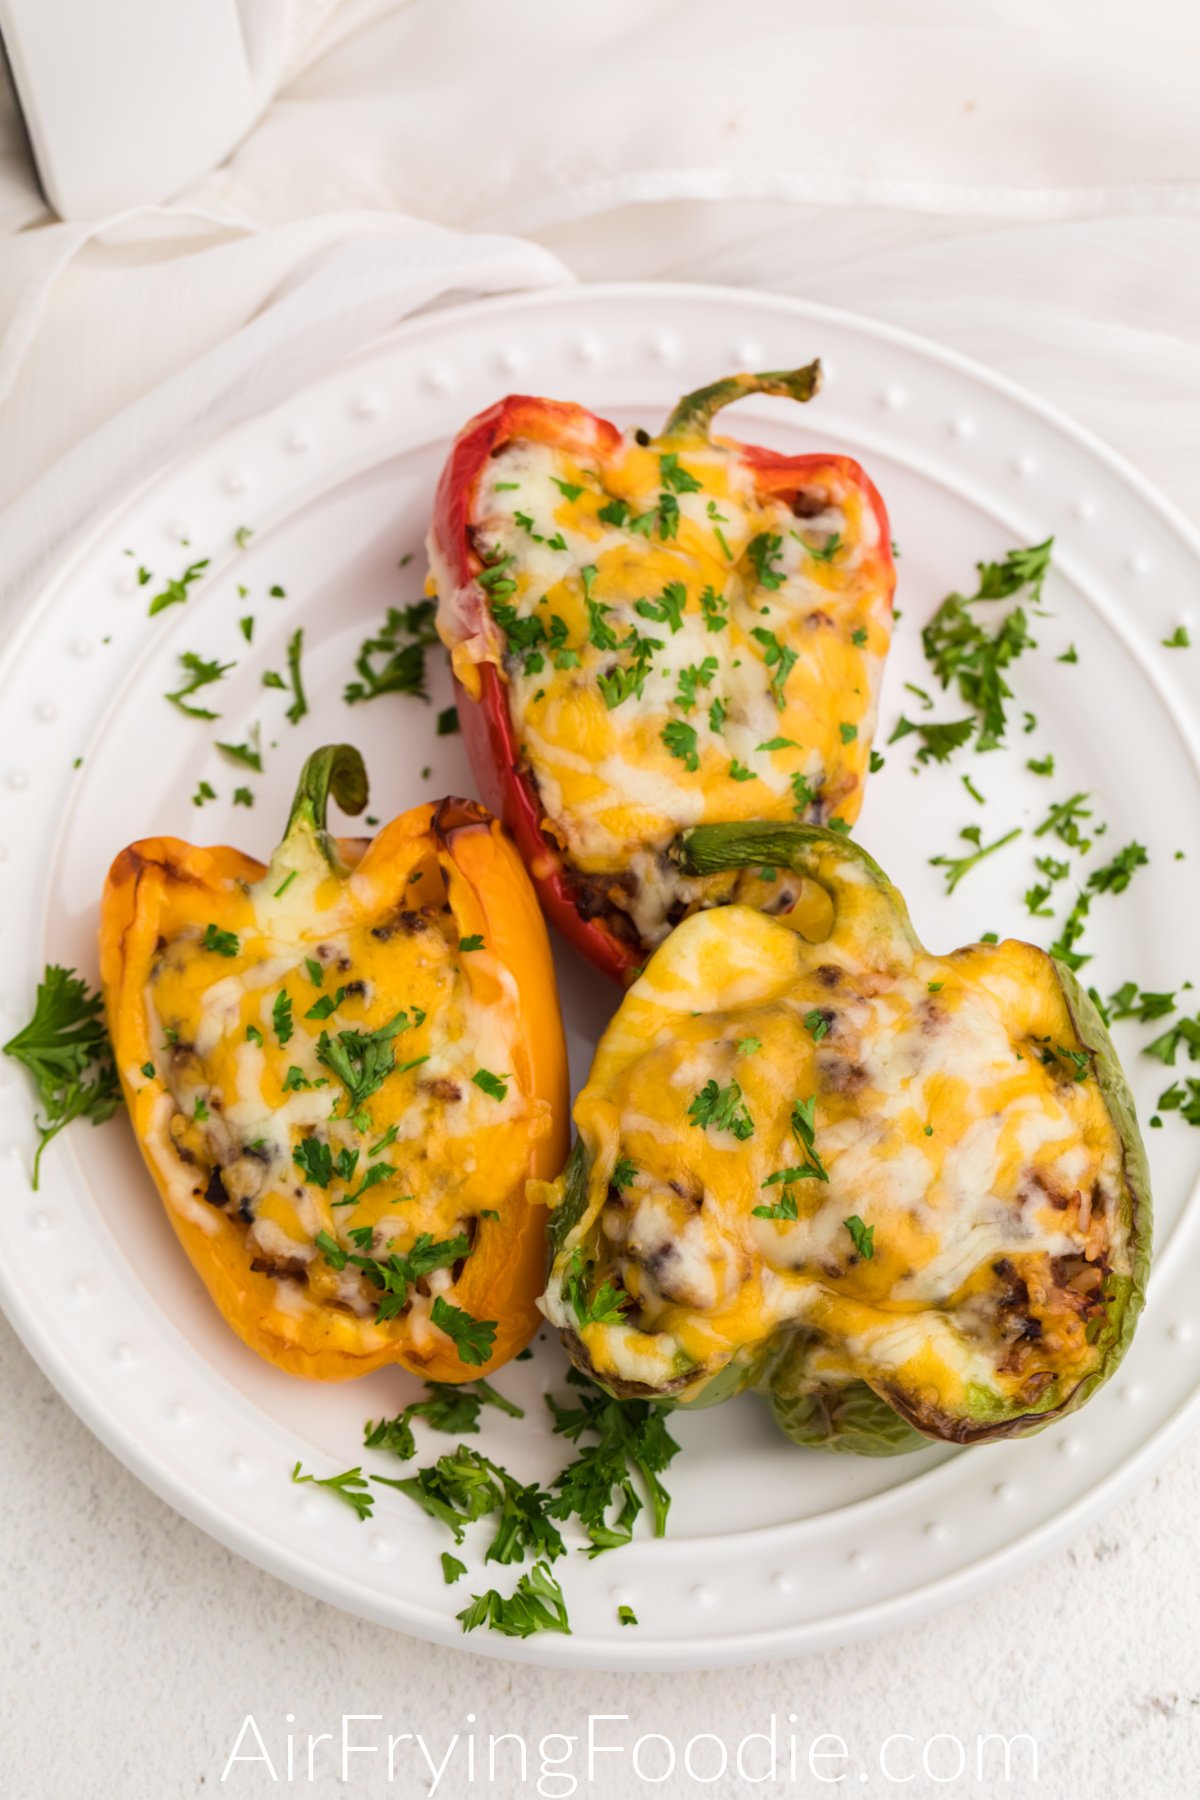 Stuffed peppers made in the air fryer, served on a white plate.